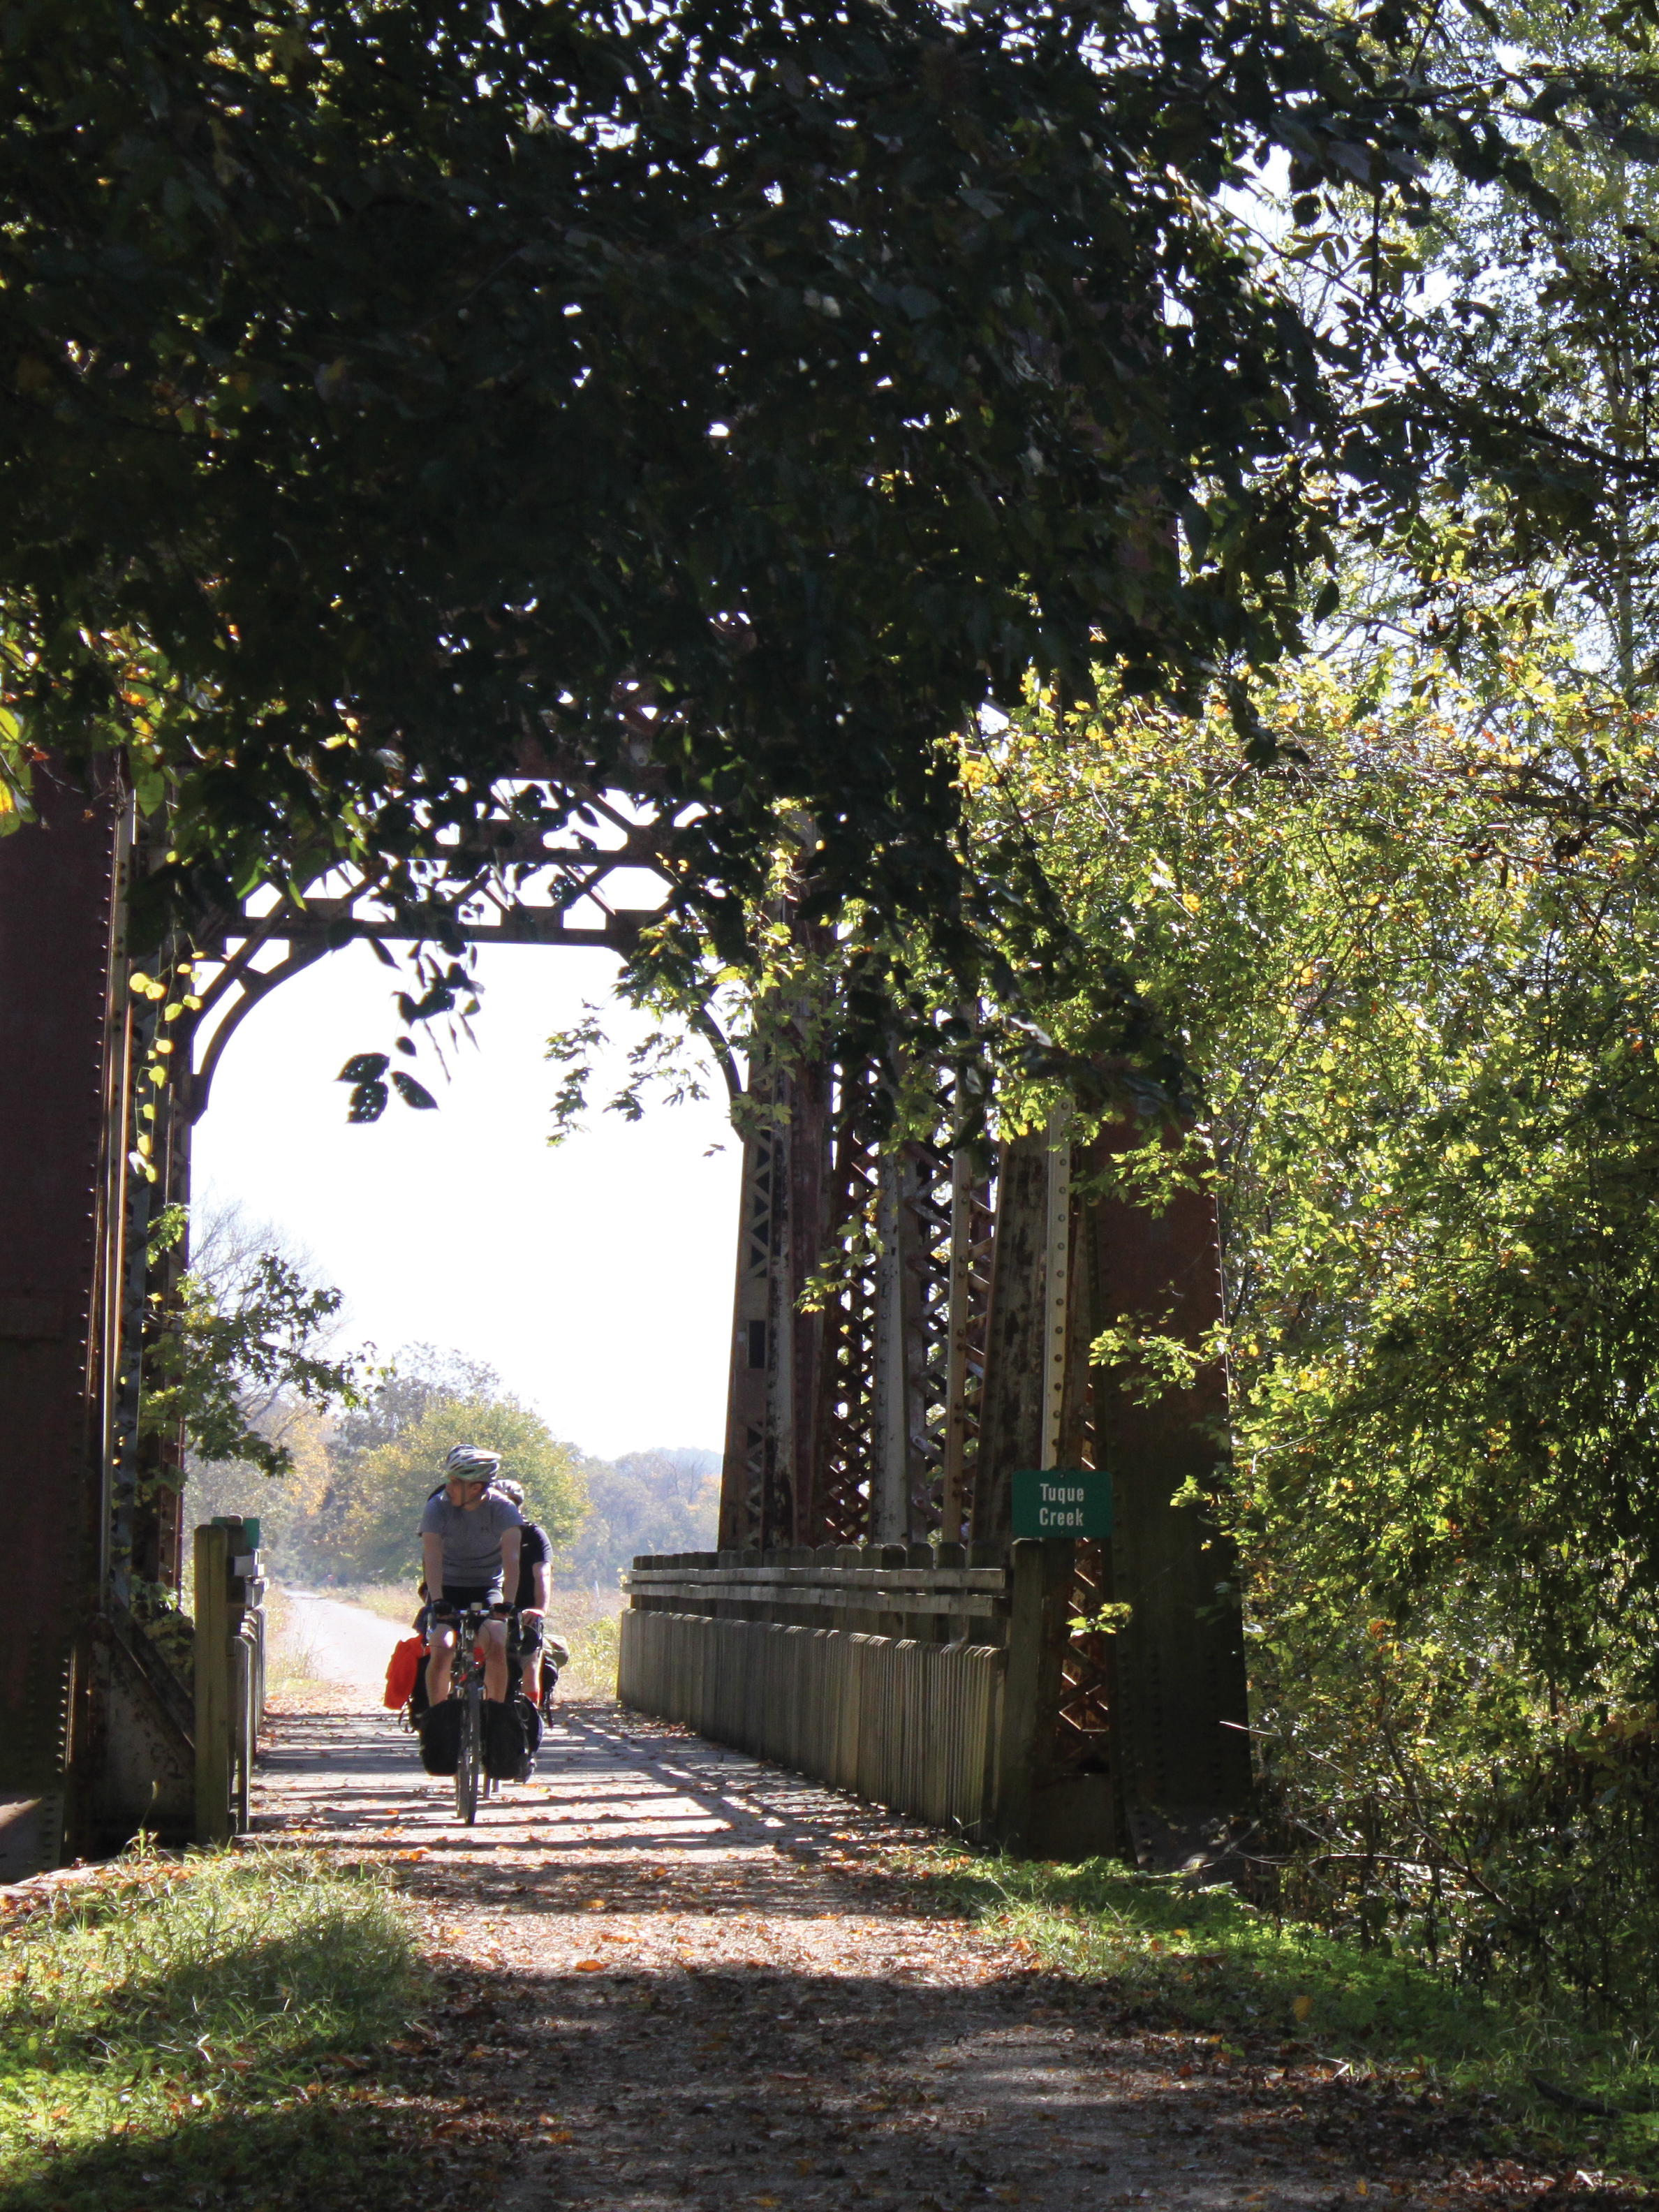 The Katy Trail Bike Tour takes participants along one of the nation's premier rail-to-trail conversion projects.